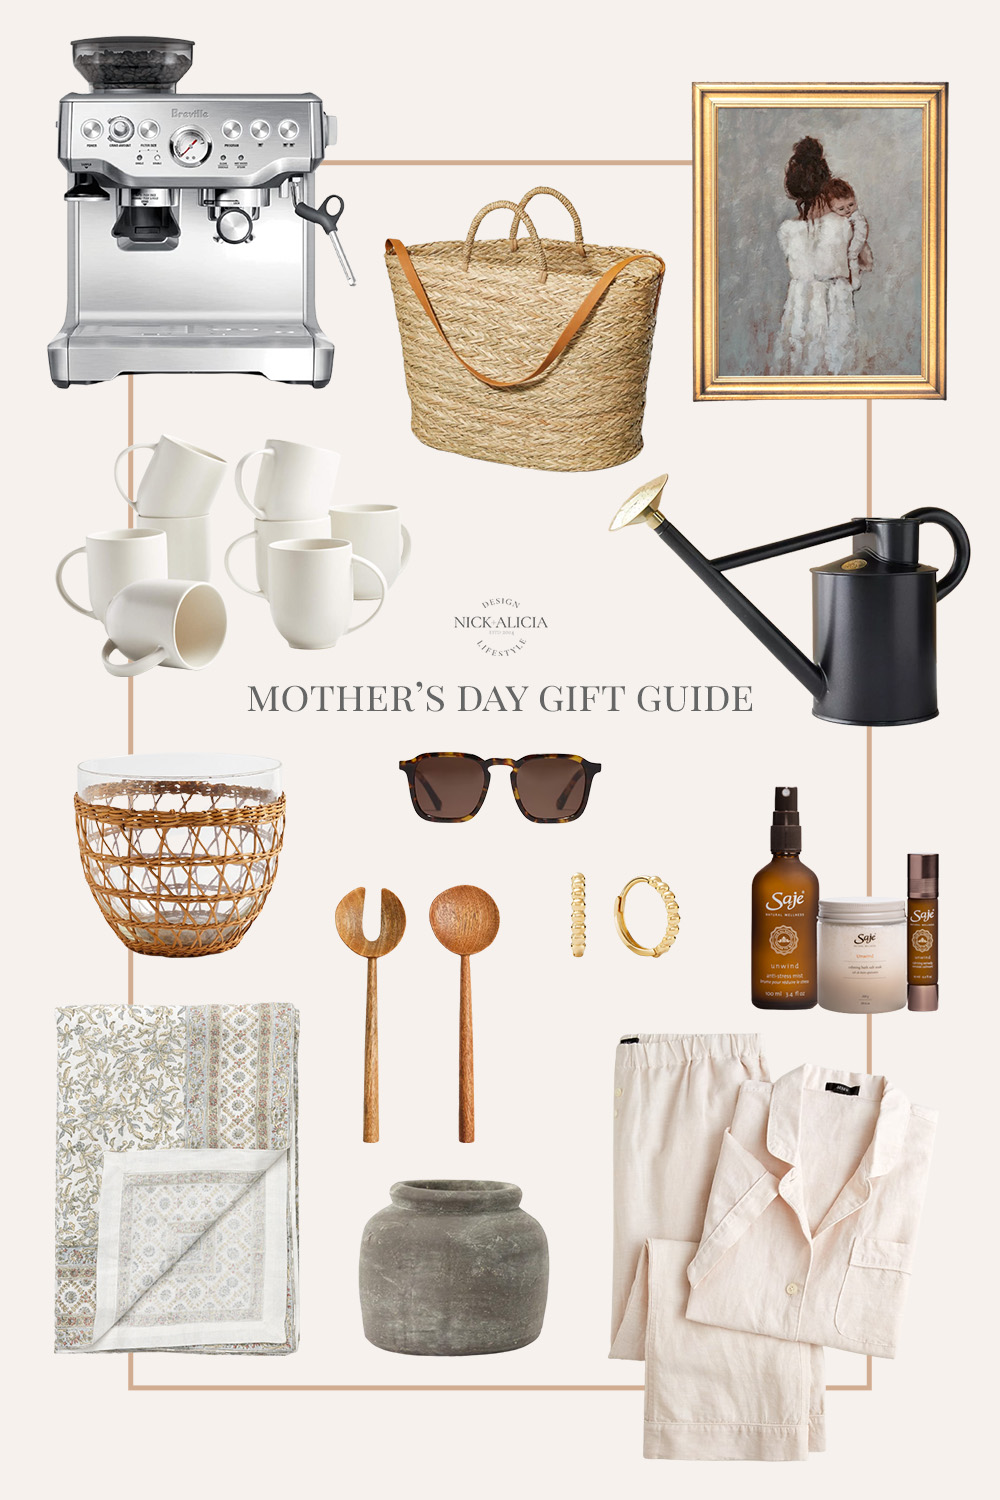 Gift Guide 2023: Mother-In-Law - The Motherchic